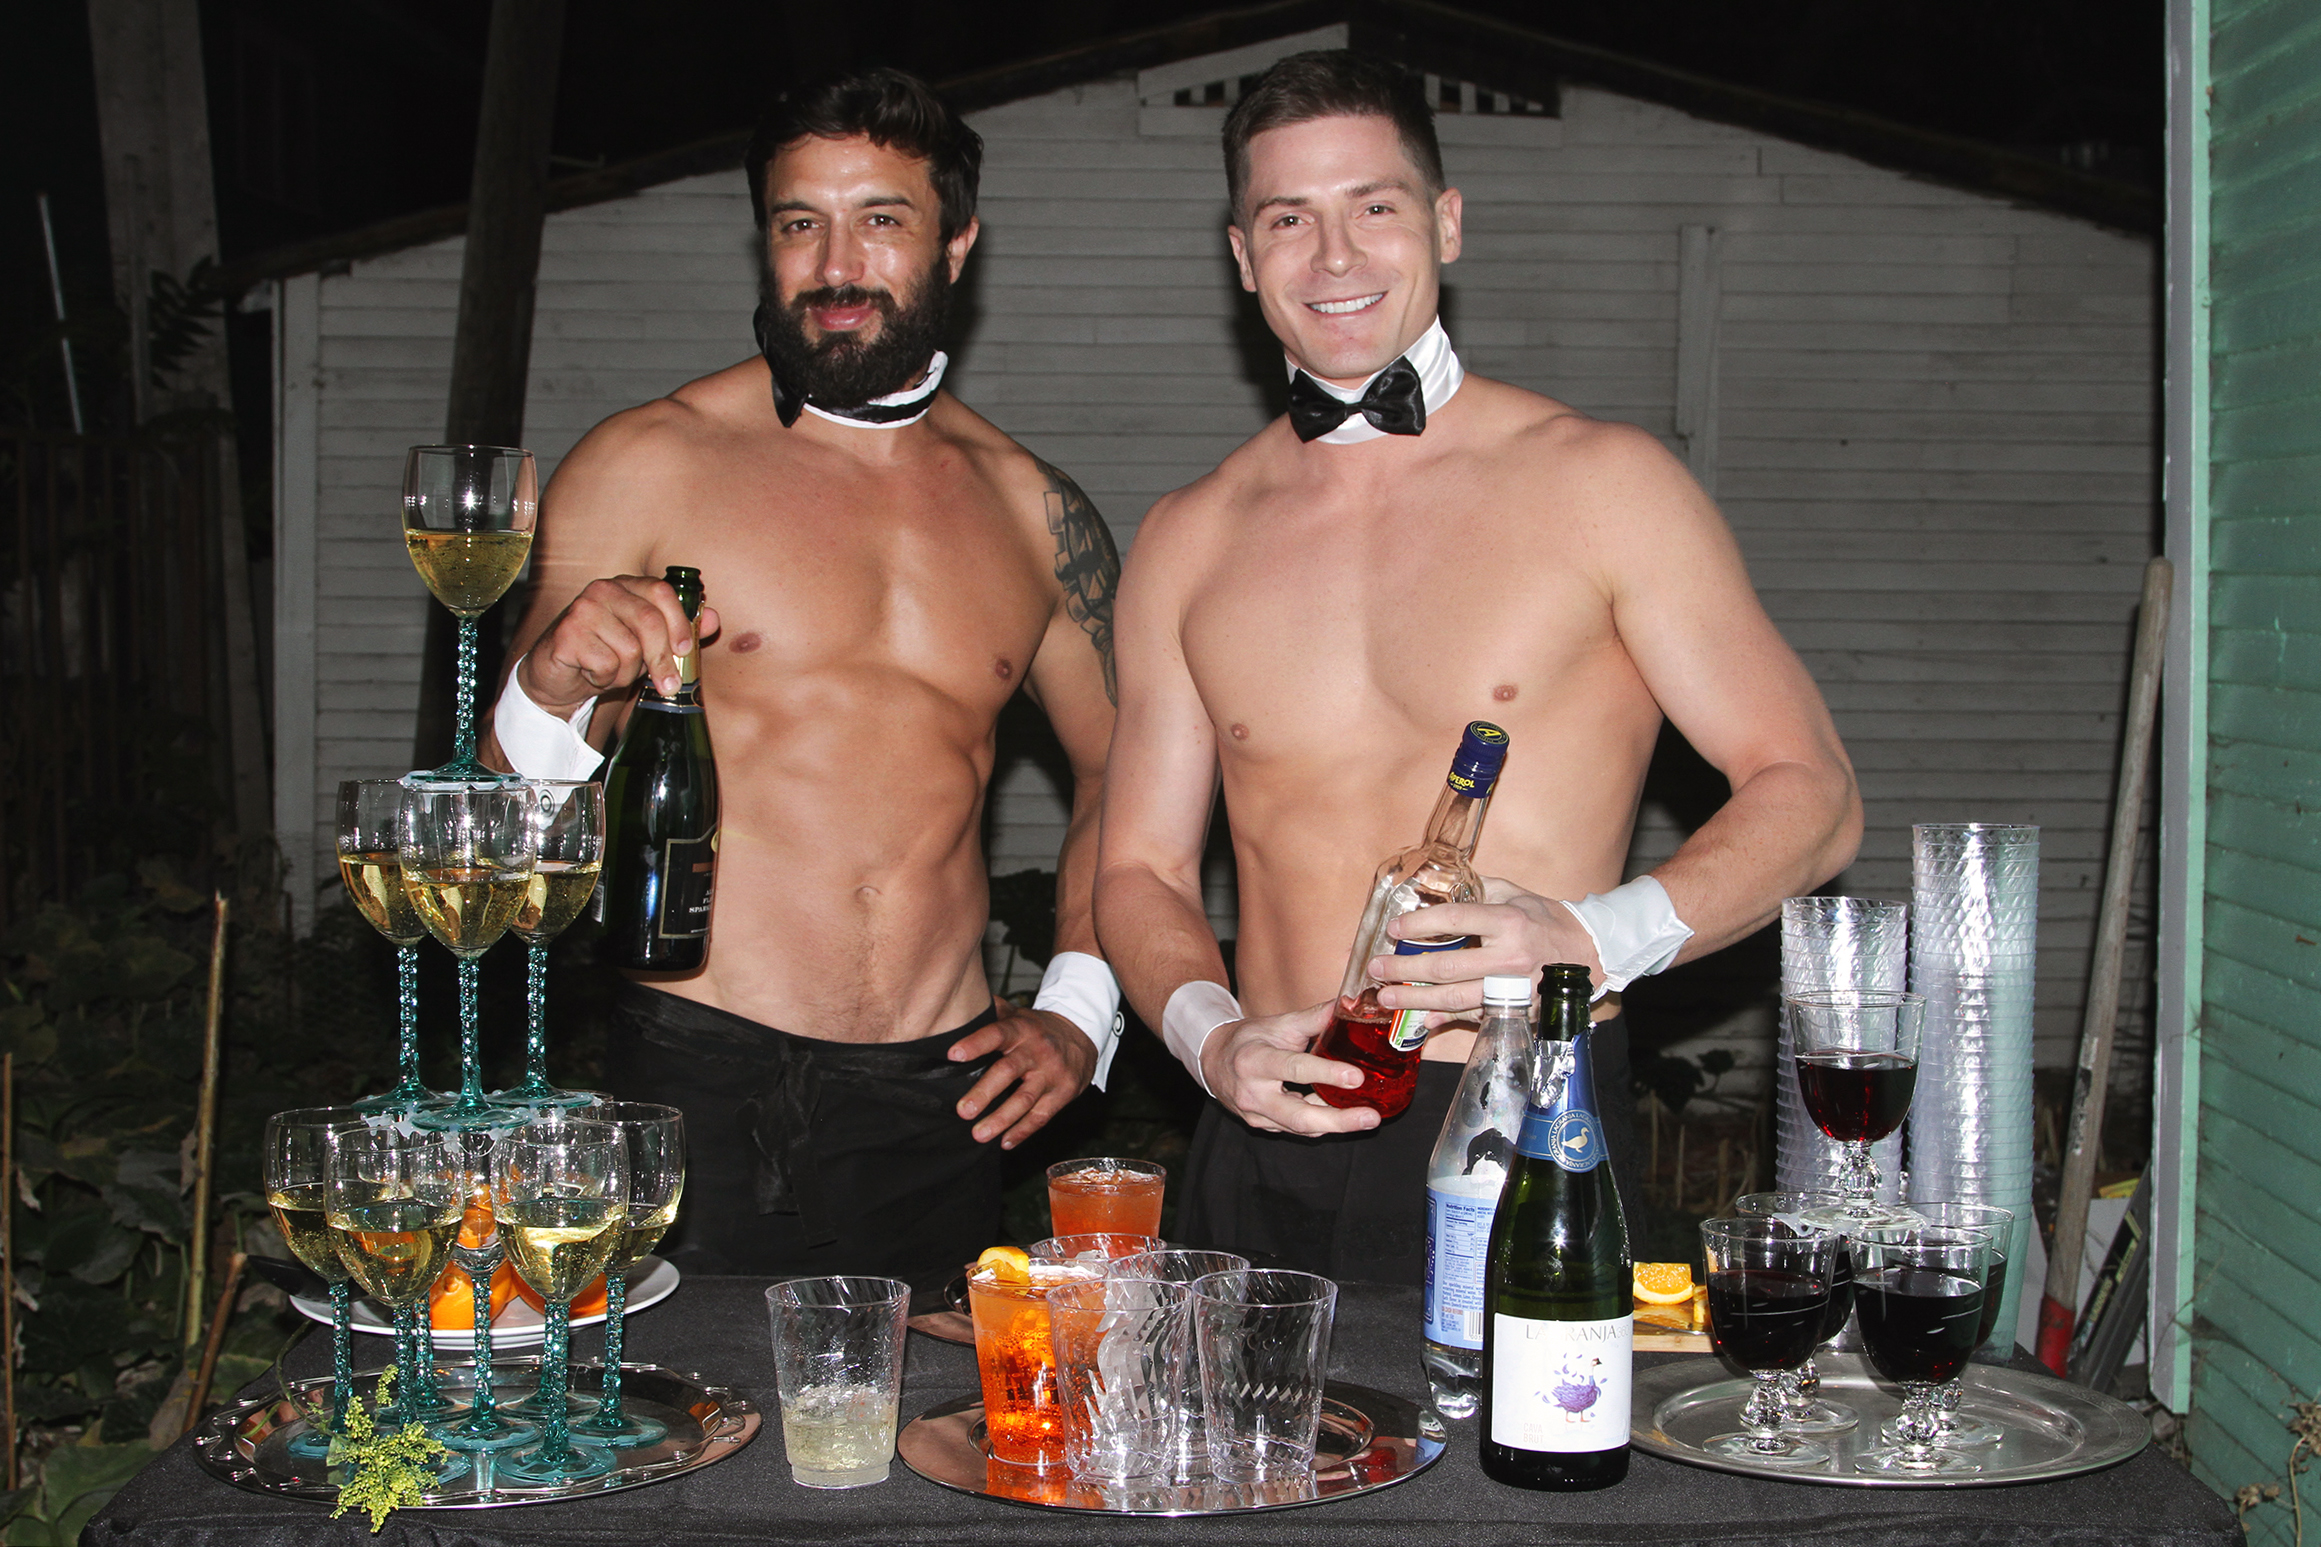 Two shirtless white male butlers smiling behind a bar